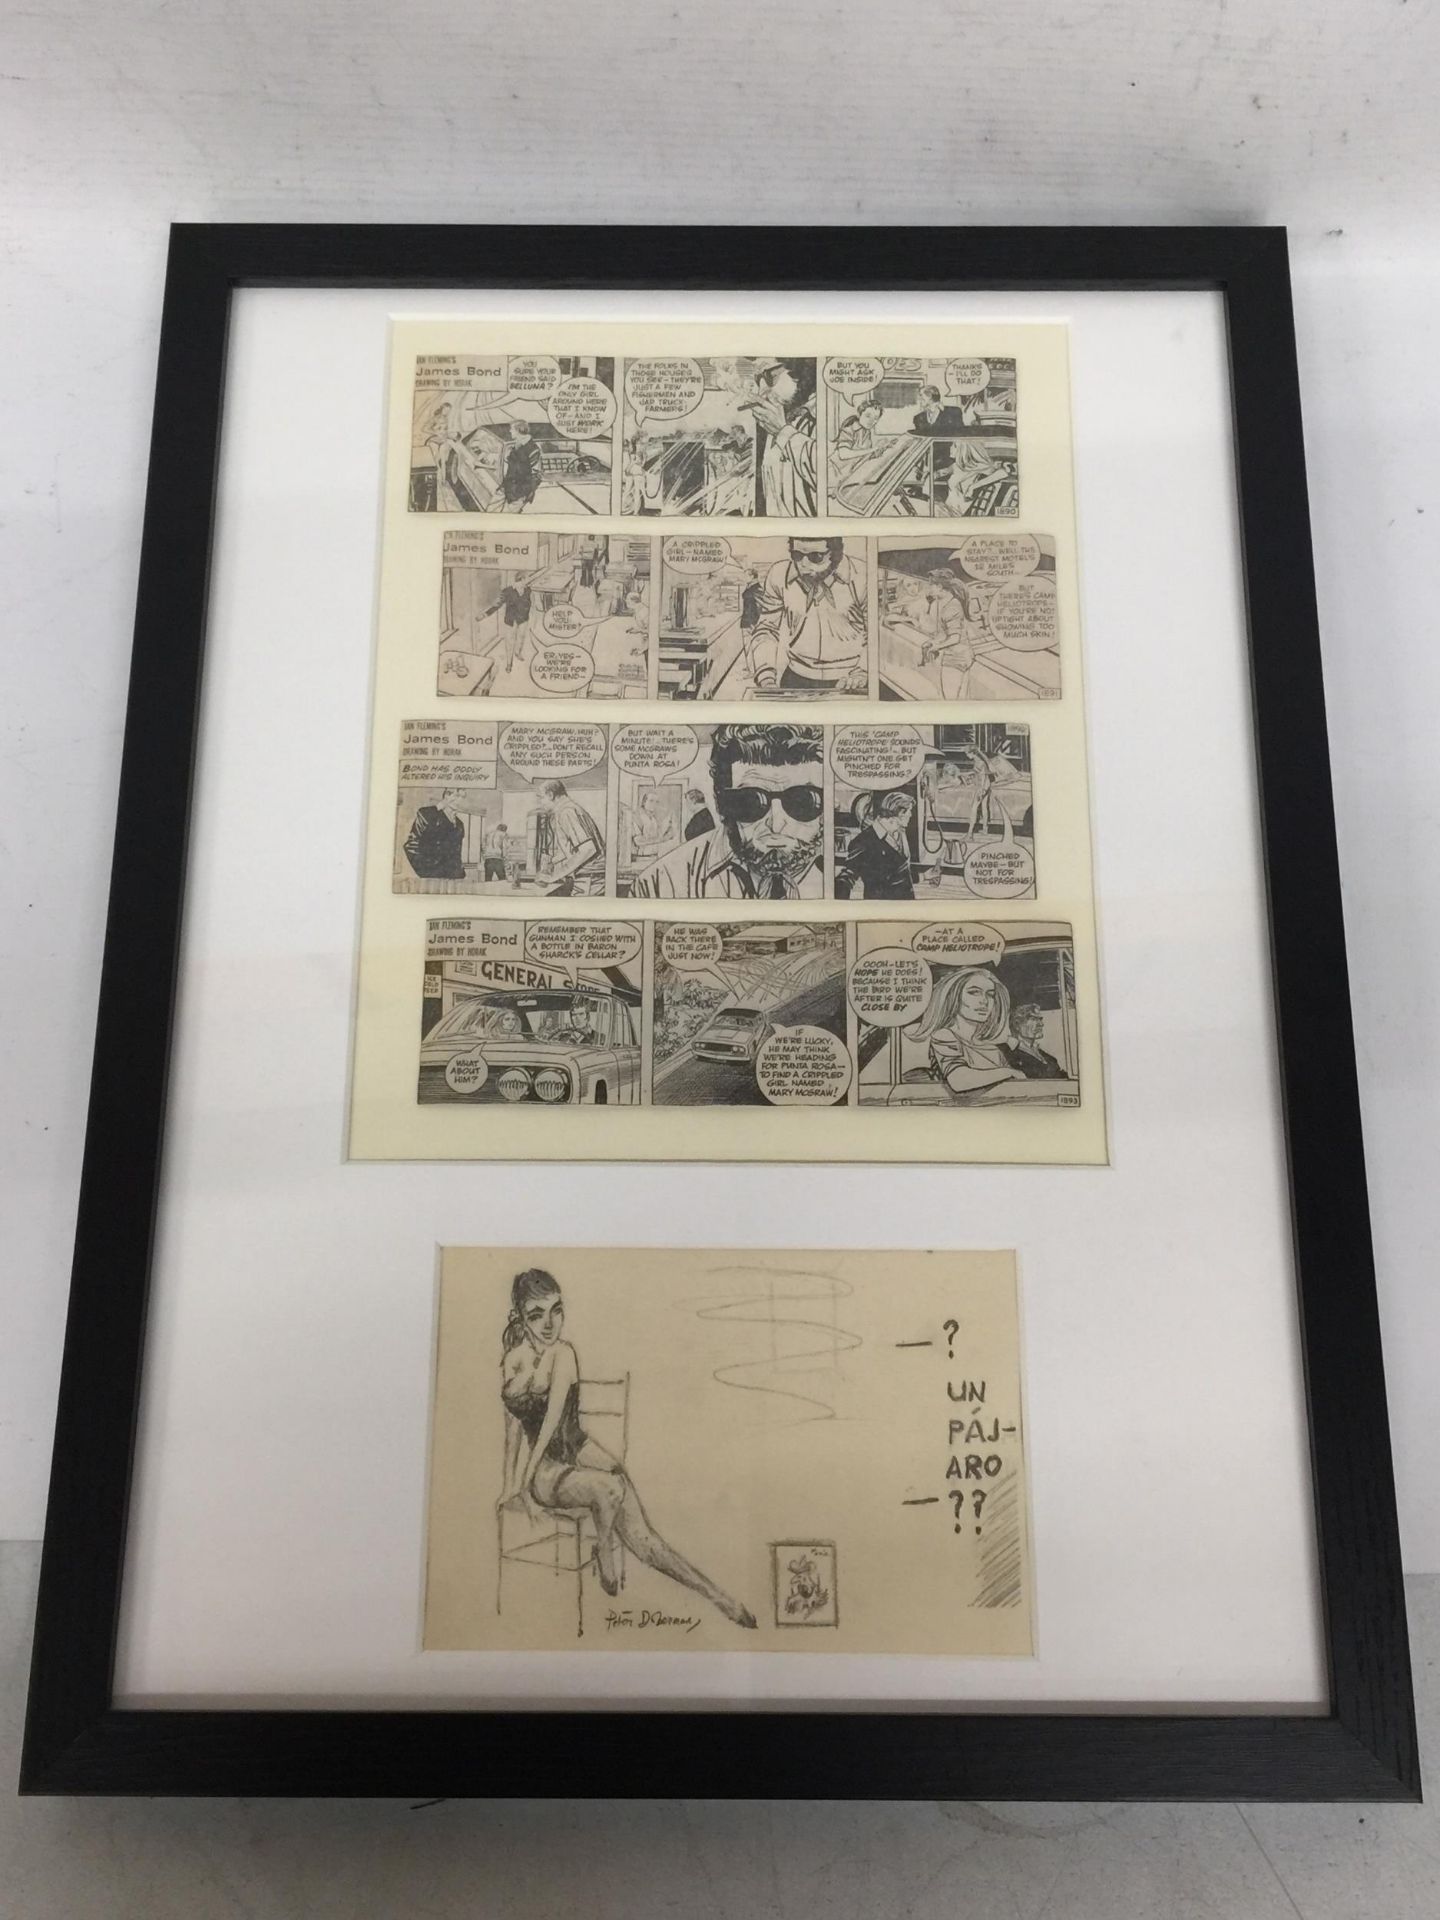 A FRAMED JAMES BOND IAN FLEMING COMIC BOOK STRIP WITH LOWER PENCIL SIGNED DRAWING OF A LADY,